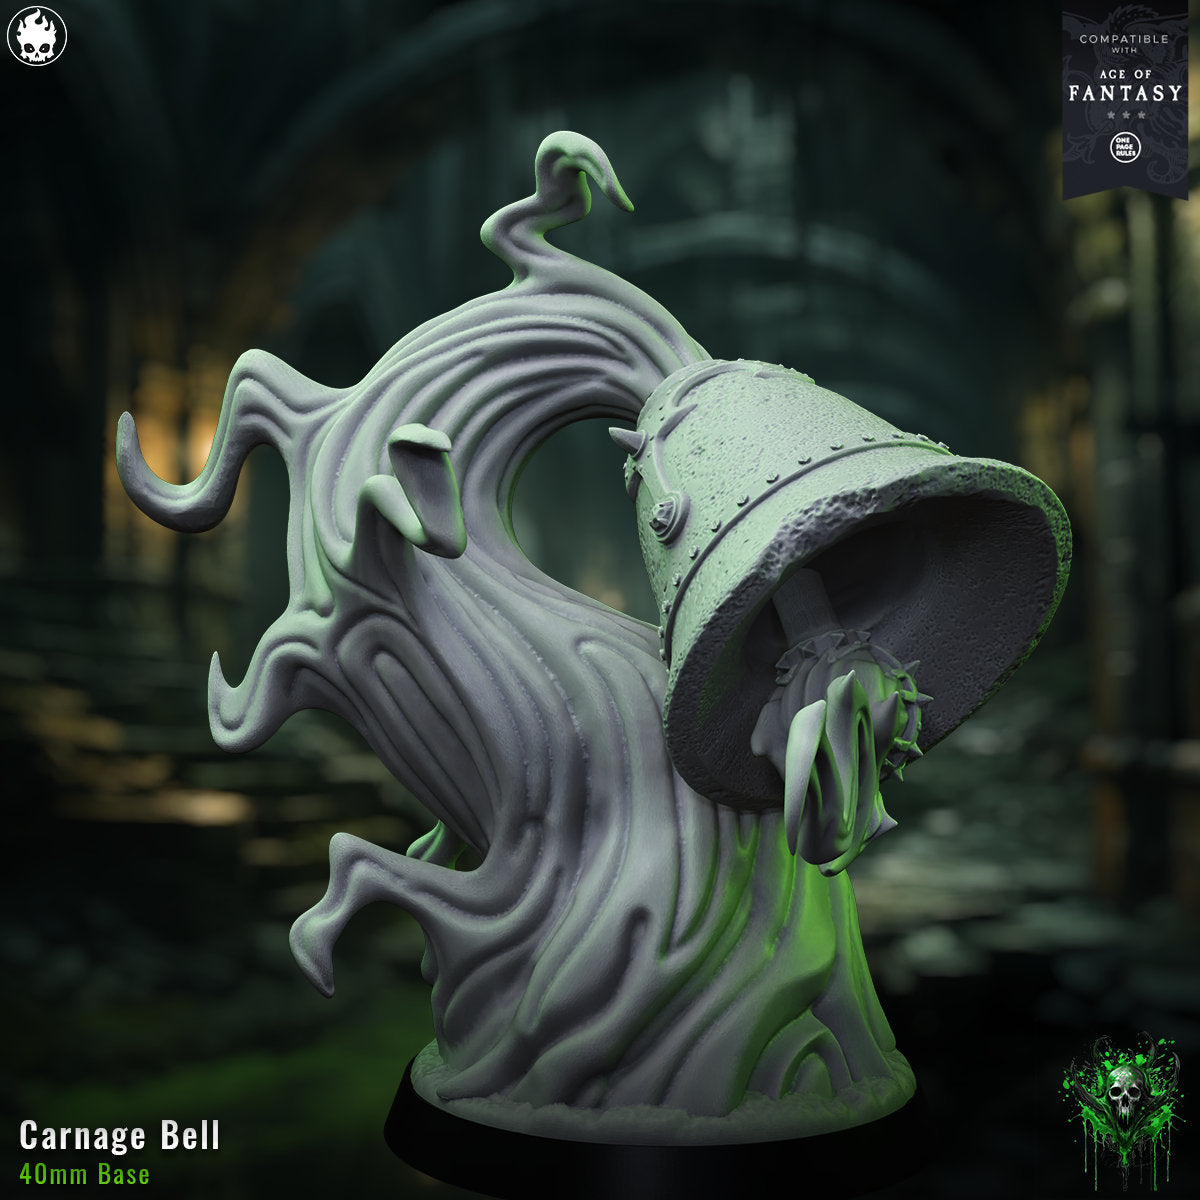 a green and white sculpture of a strange looking object